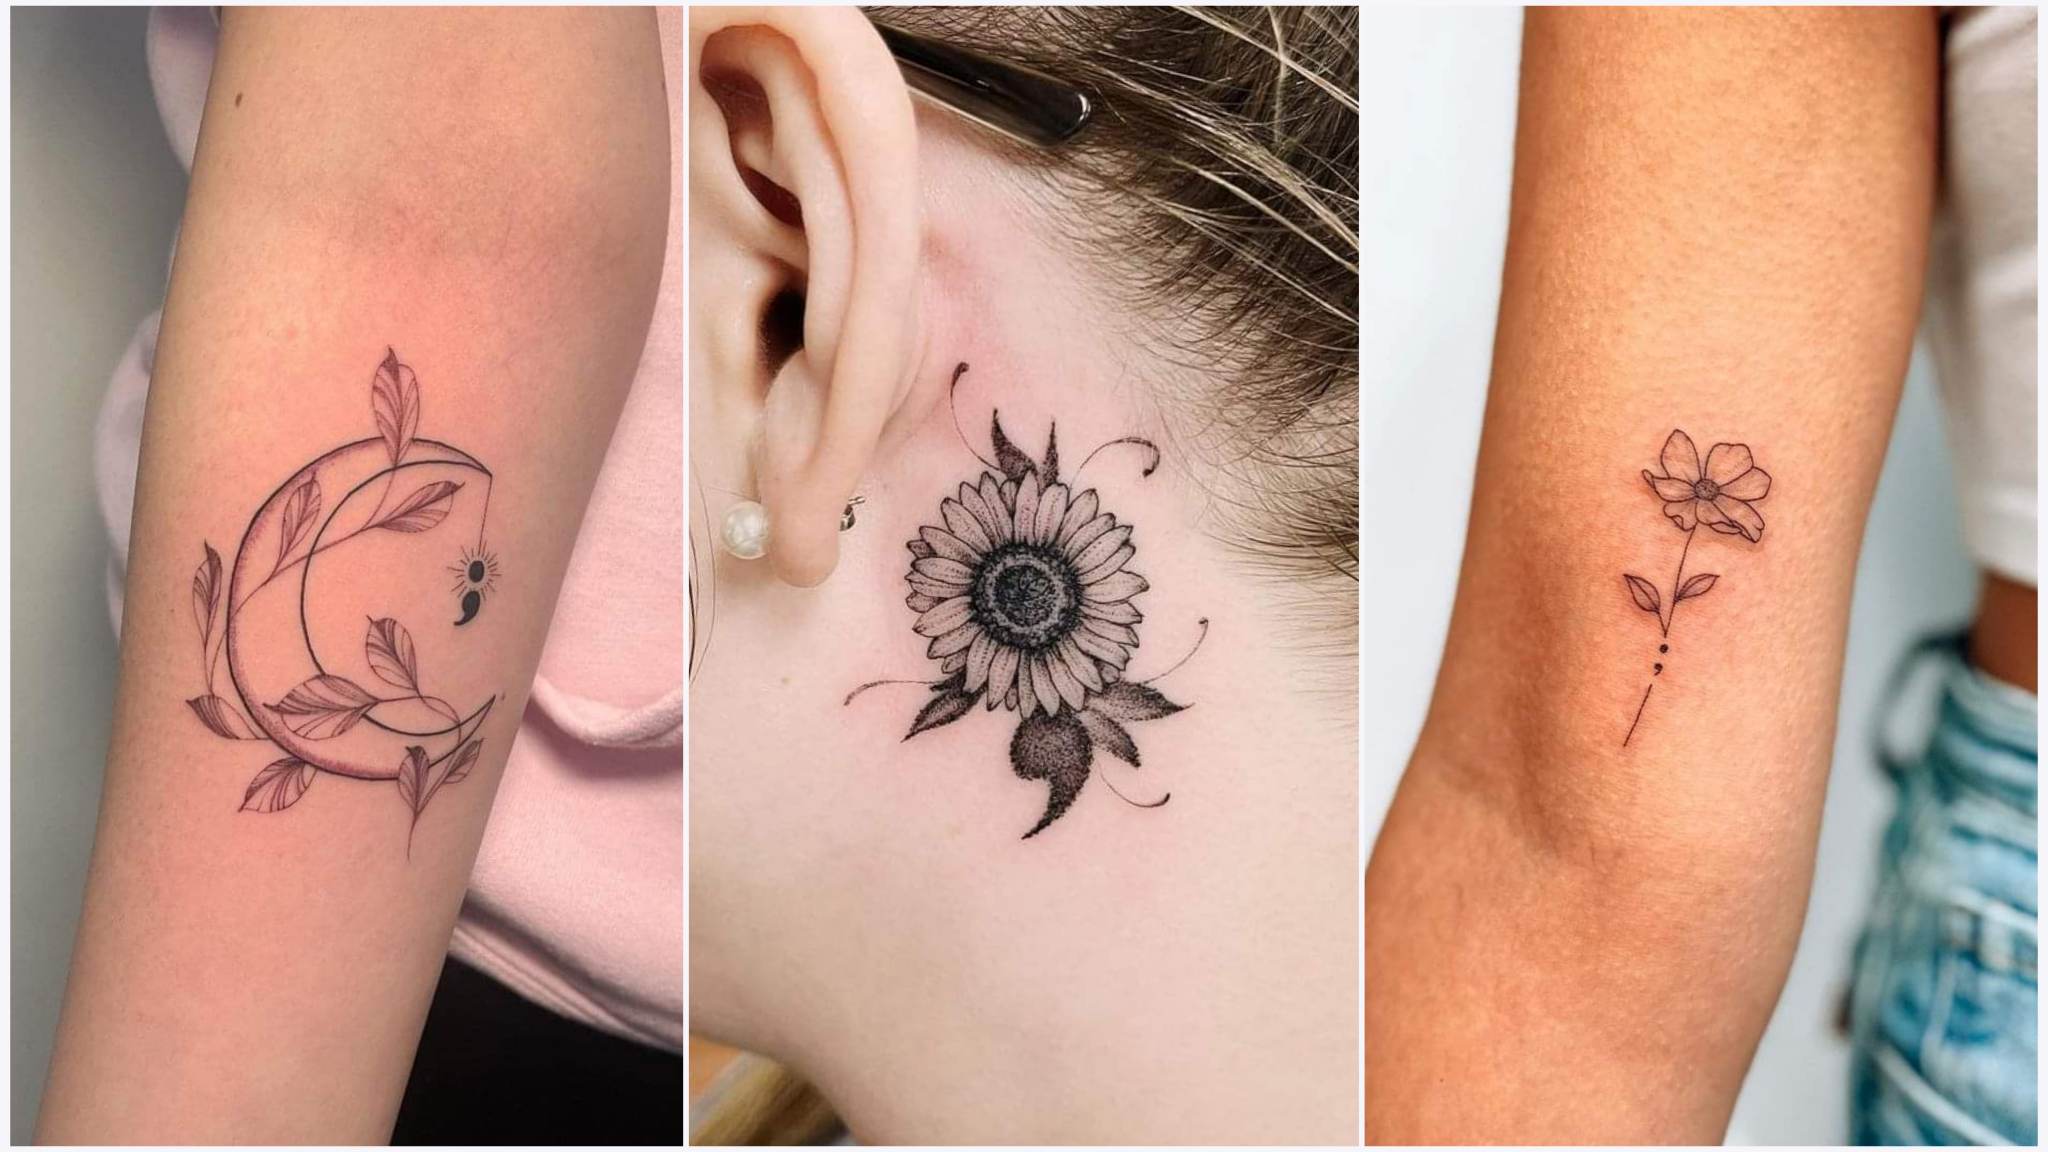 The powerful little tattoo supporting people with mental illness | MiNDFOOD